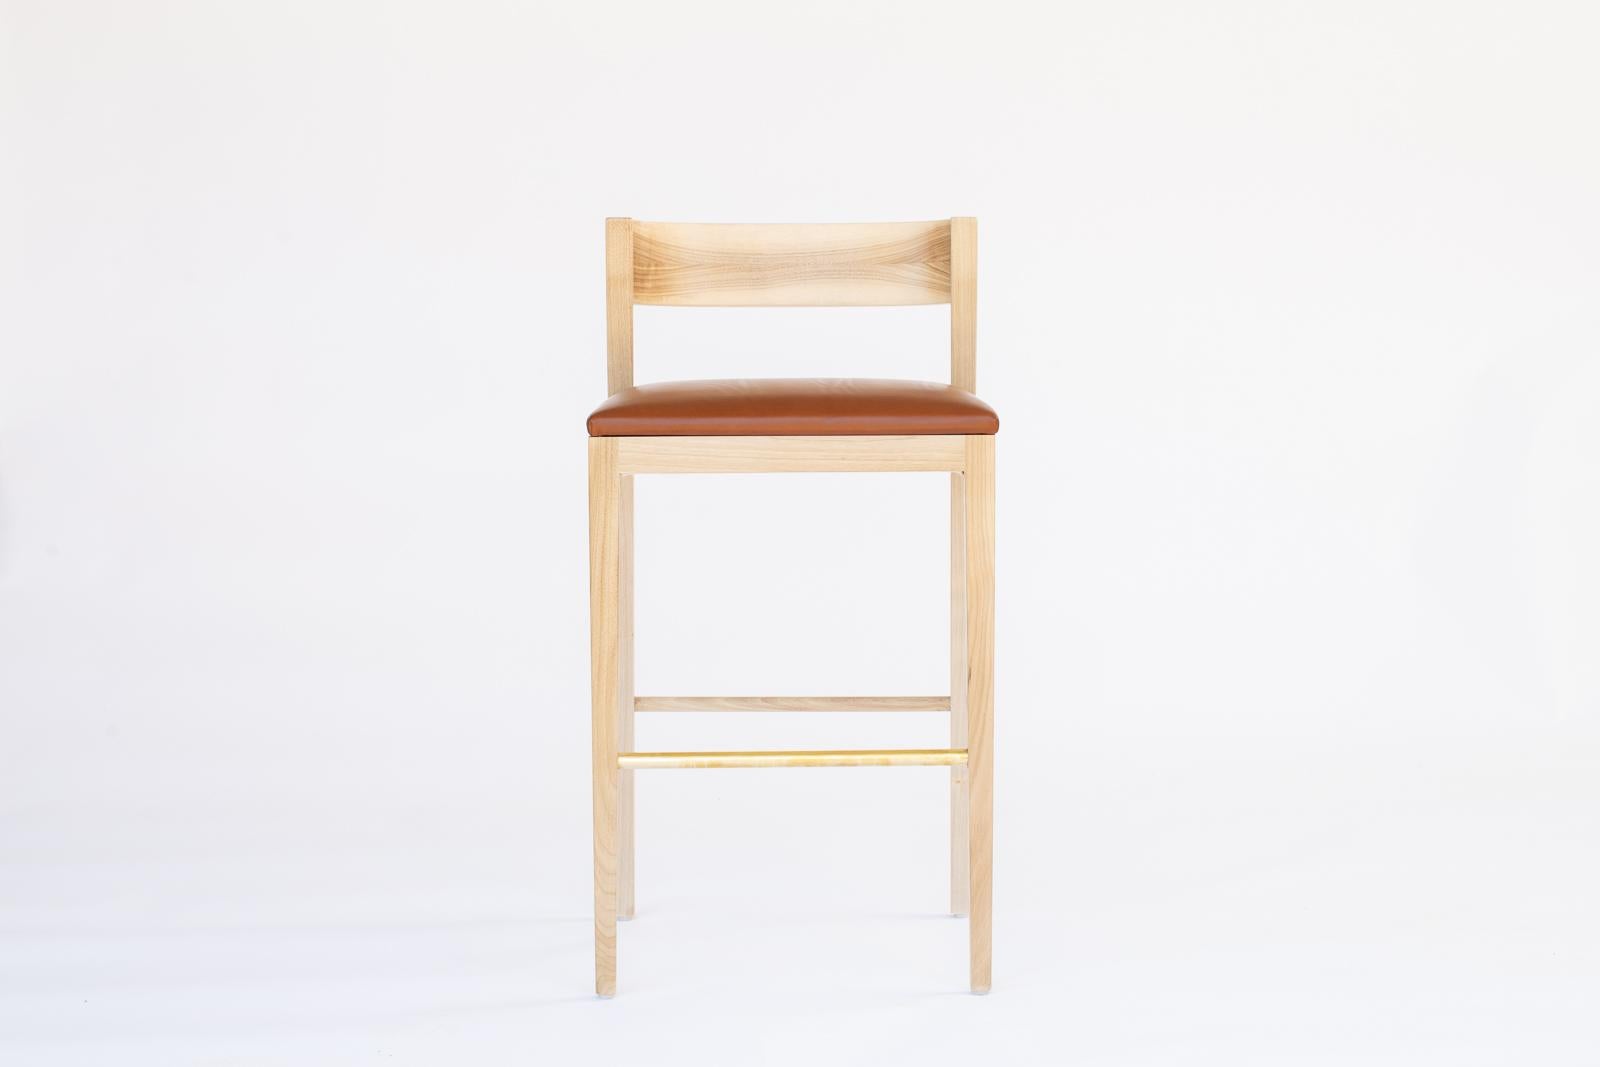 A tailored counter stool inspired by the Bahaus movement of the 1920s. This refined stool has a Minimalist flair, with its refined tapered legs and distinctive back support. Custom sizes and finishes available.